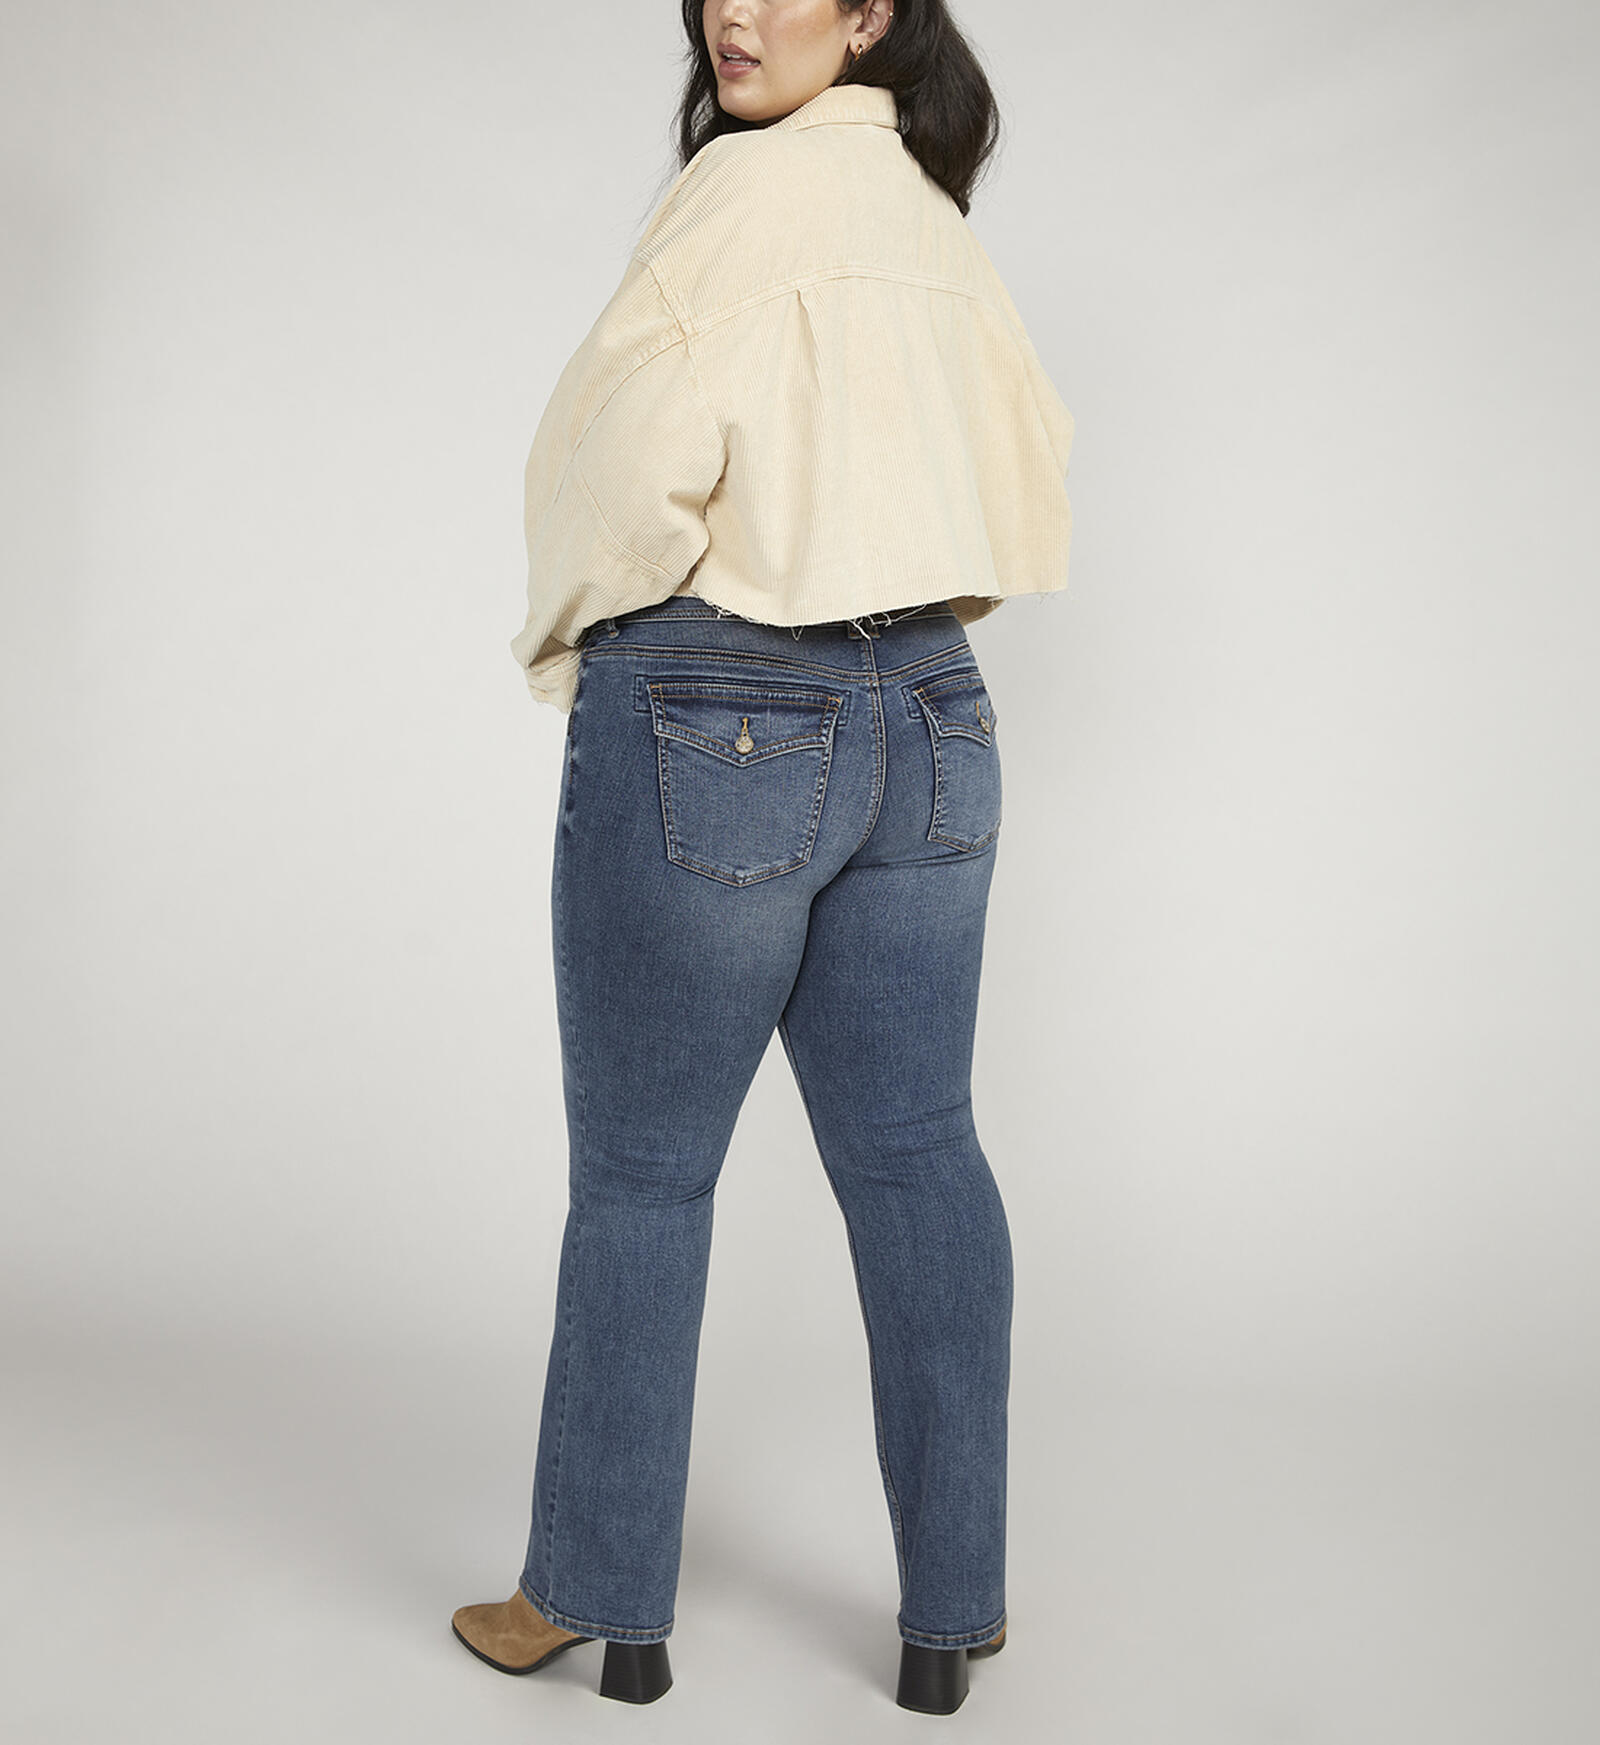 Buy Elyse Mid Rise Slim Bootcut Jeans for USD 84.00